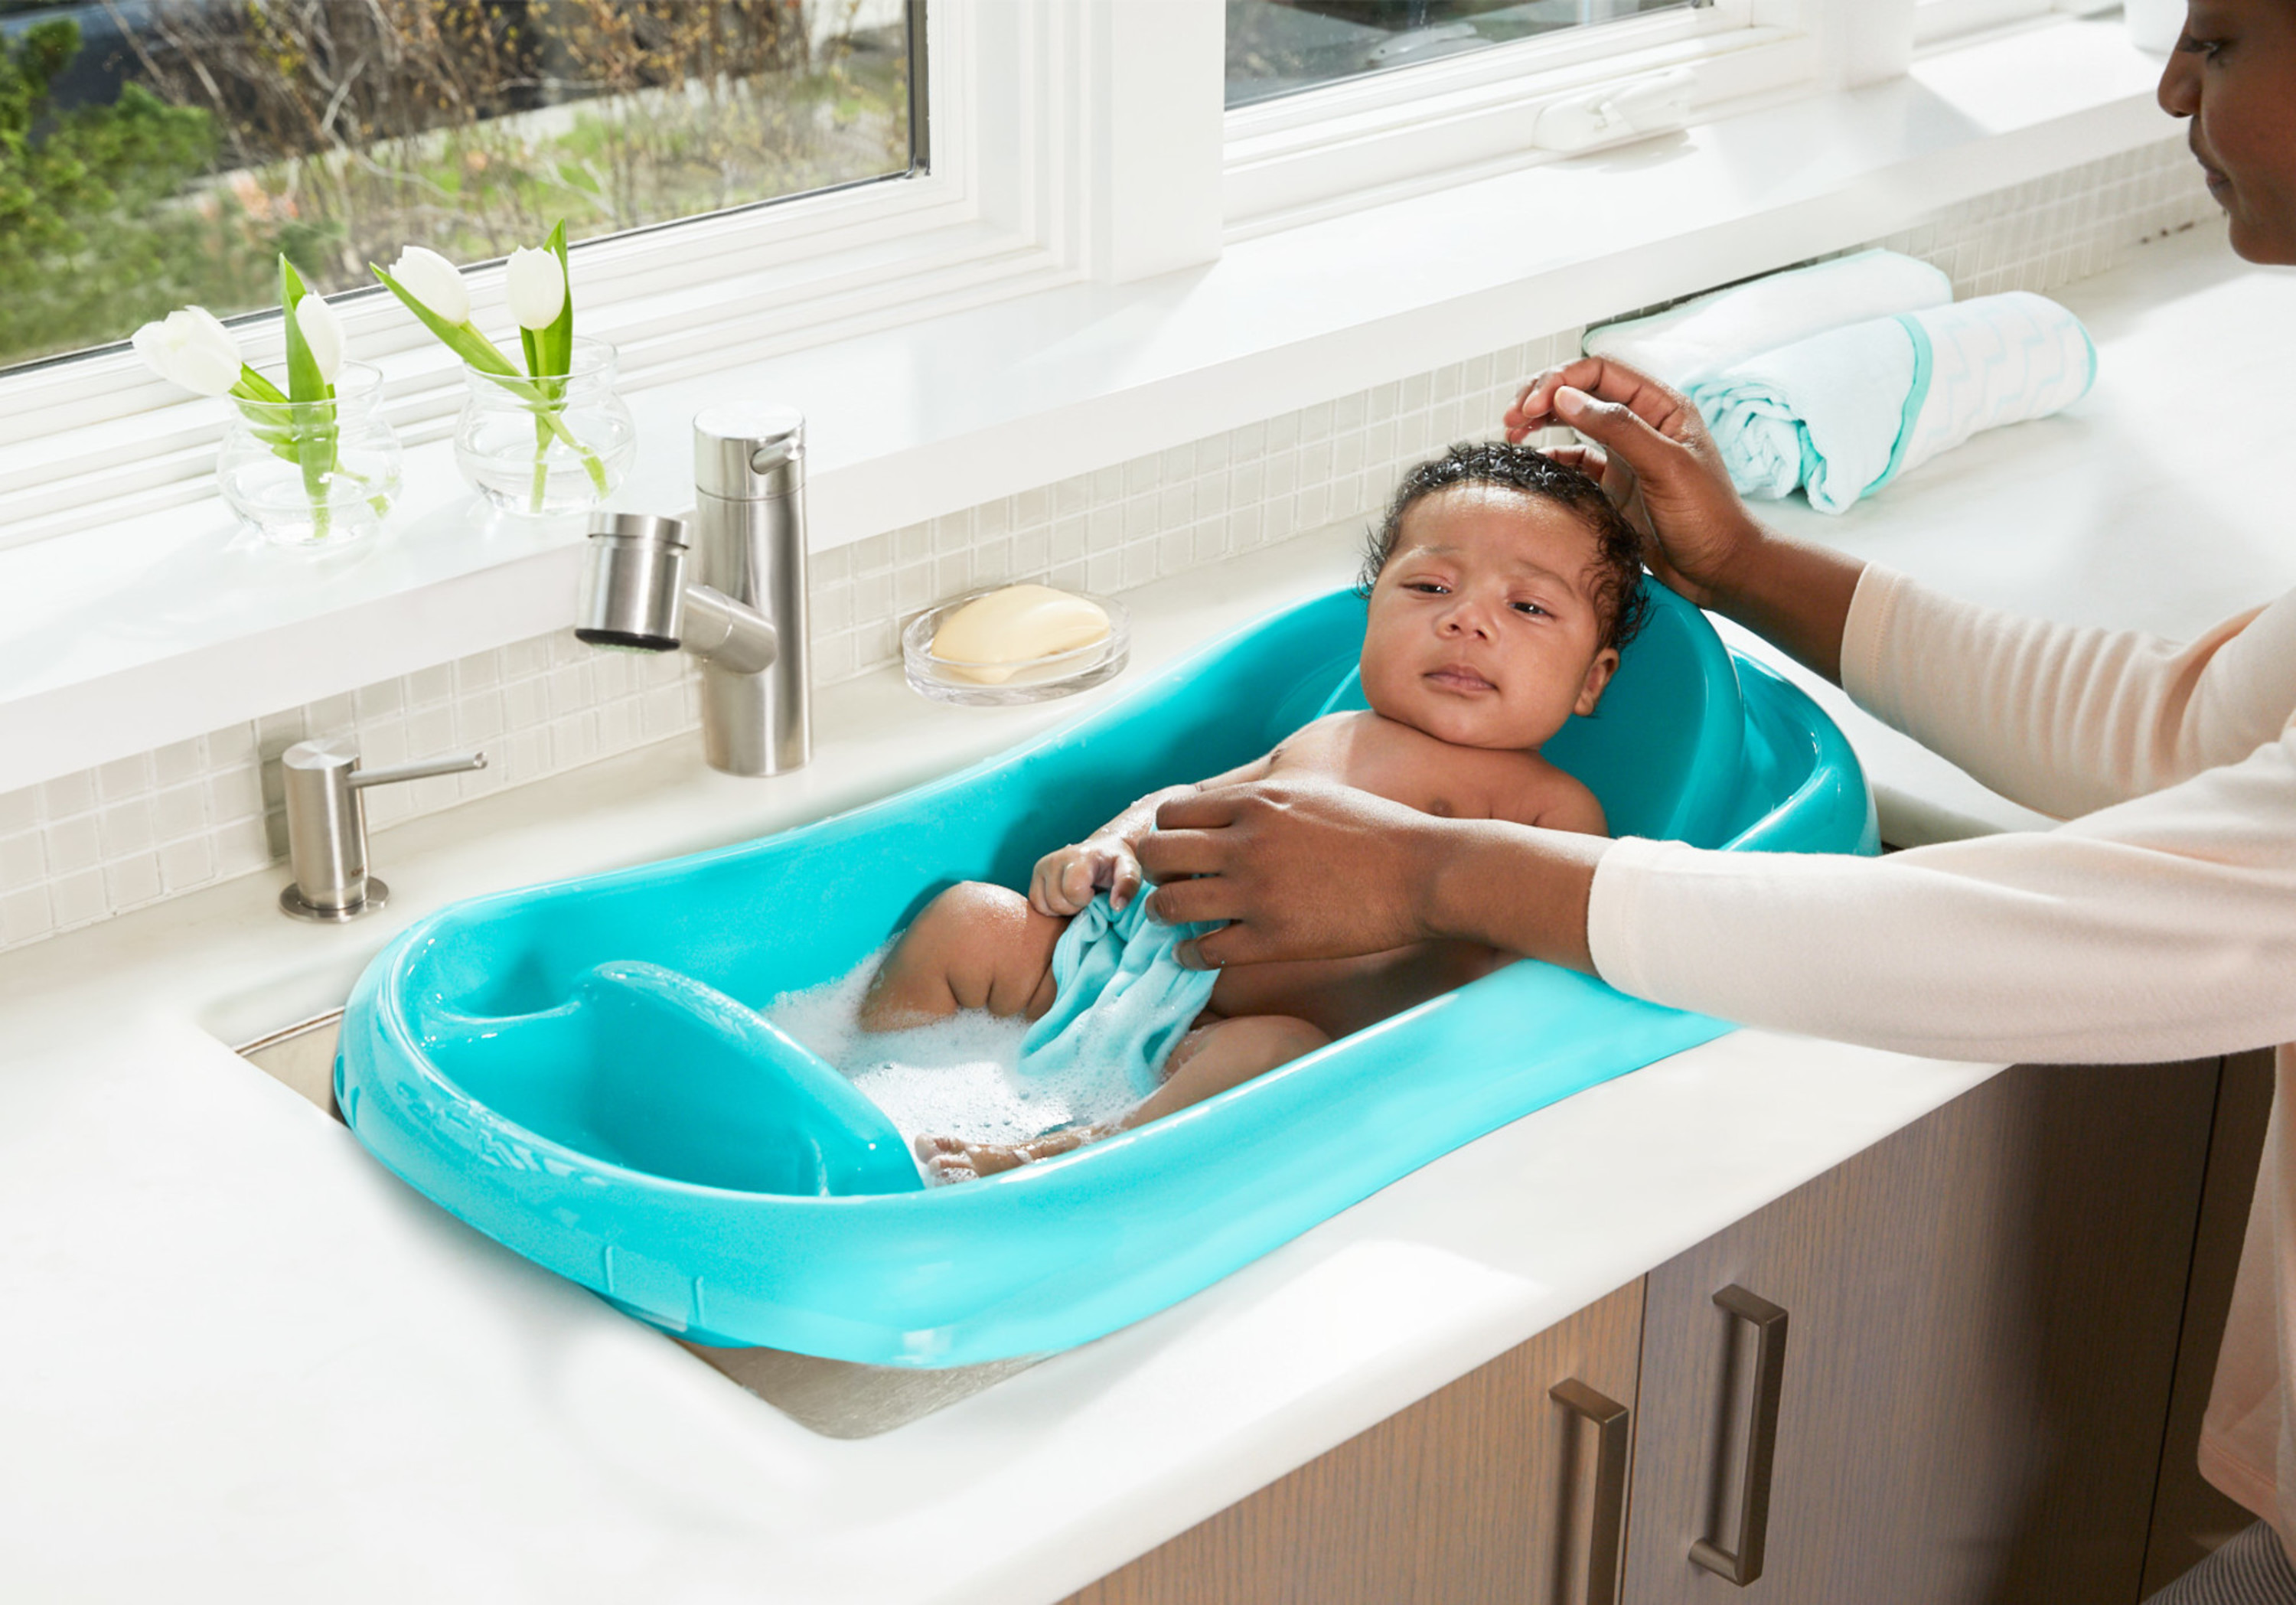 The First Years Sure Comfort Newborn to Toddler Baby Bath Tub, Infant Bath Tub, Teal - image 4 of 6